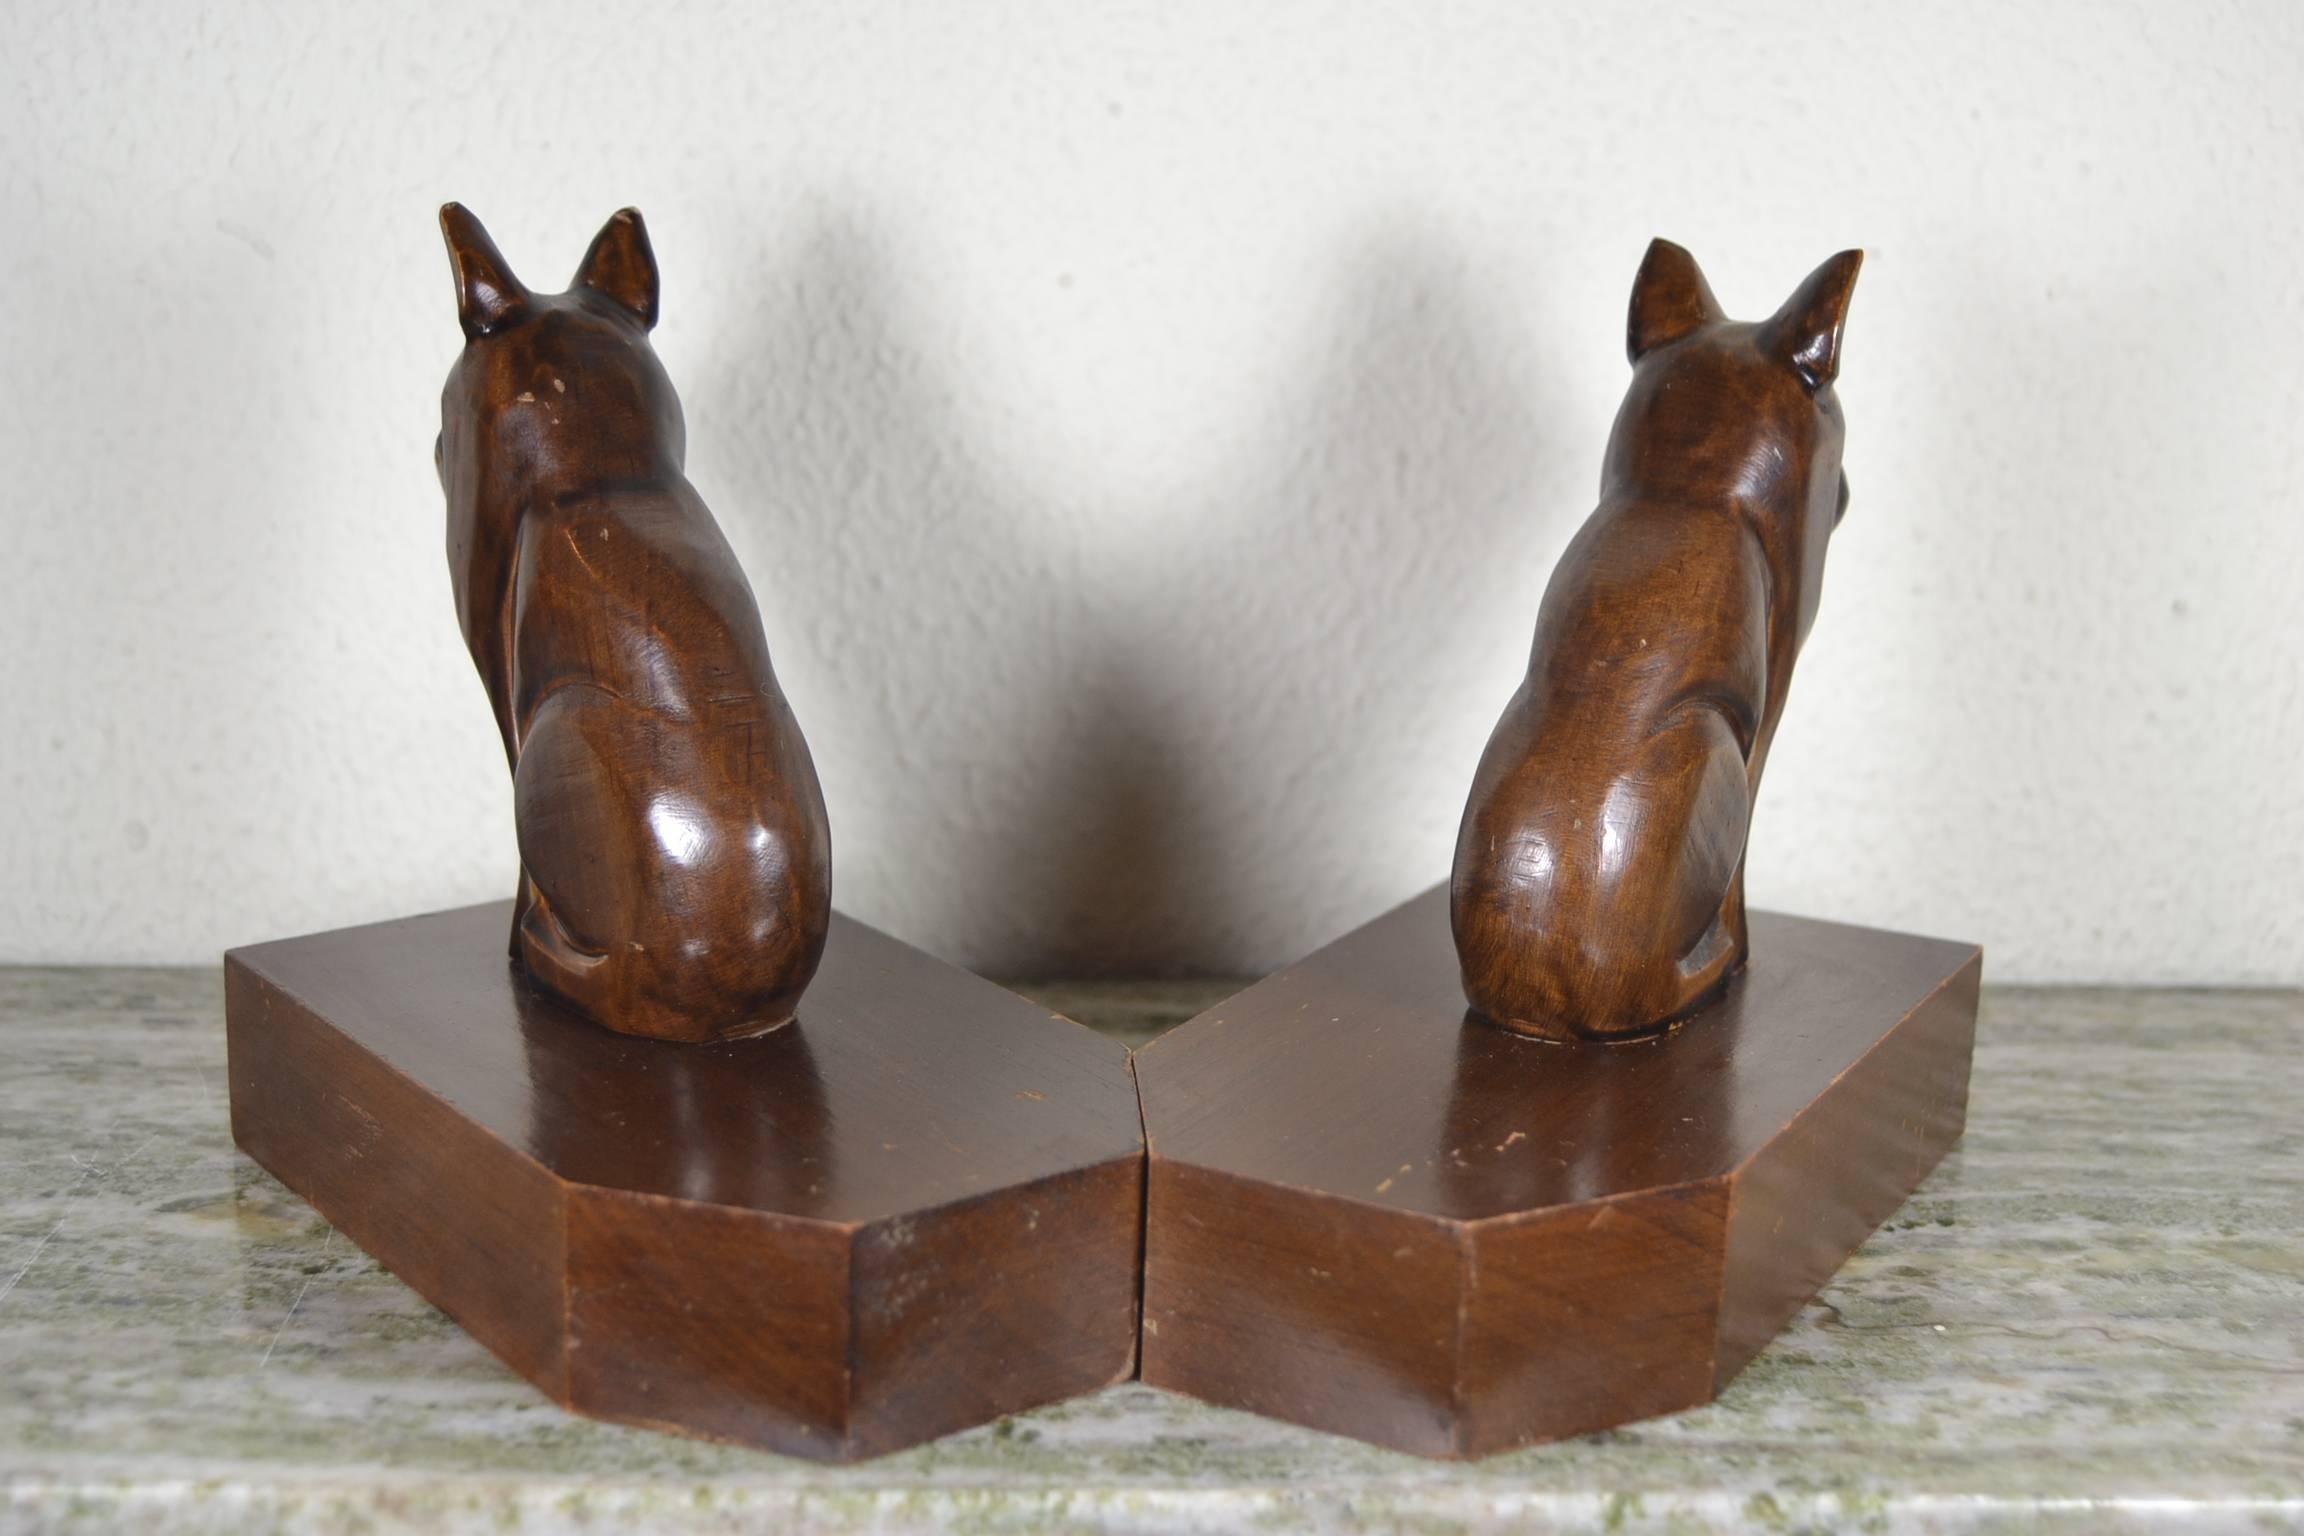 Hand-Carved Art Deco Bulldog Bookends, Wood, Europe